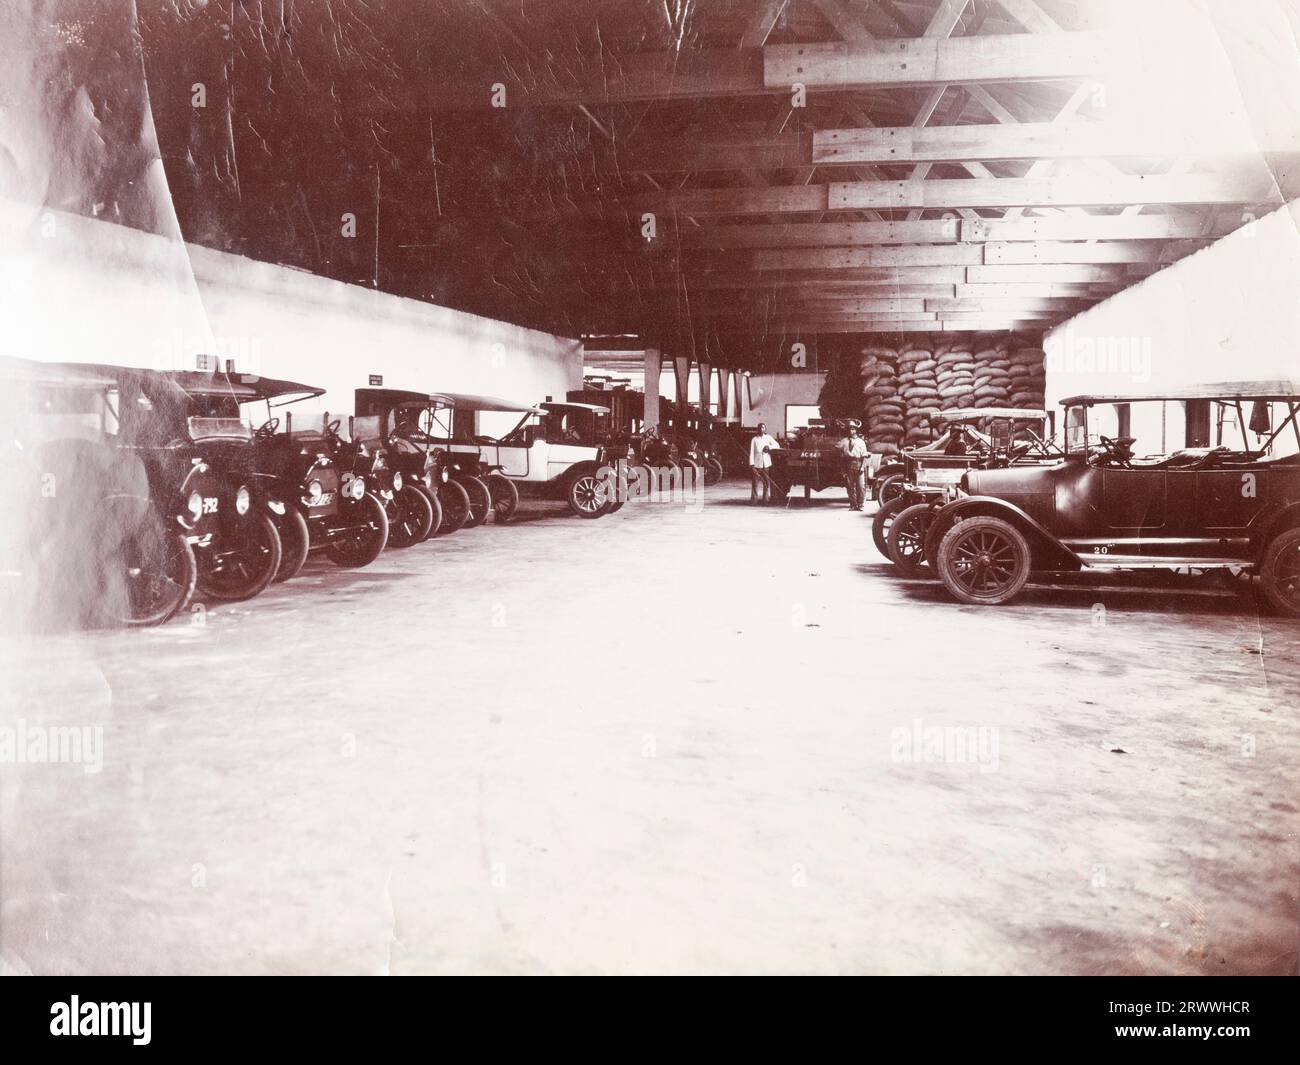 Interior of the garages of the mining company Swanzy & Co., showing around 12 cars neatly parked and a large pile of sandbags in the back corner. Two African men are standing with one of the cars. -Original manuscript caption: 4/4/18. Swanzy's Motor Transport Dep., Accra. Later manuscript caption: Motor Transport Depo Accra. Stock Photo